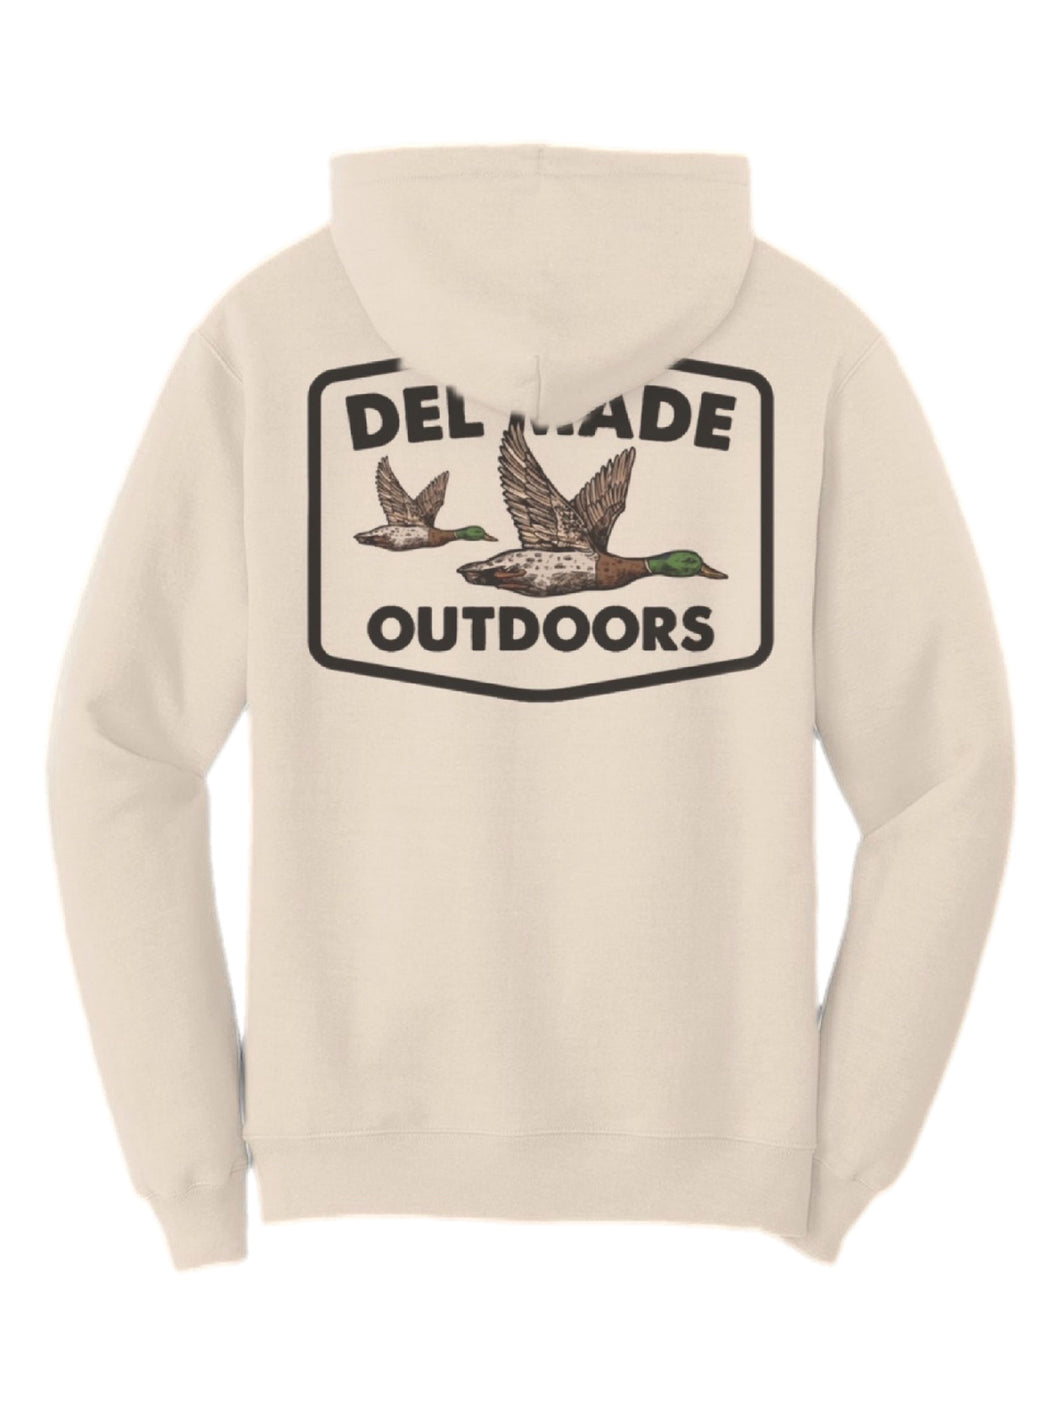 DEL Made Outdoors Hoodie